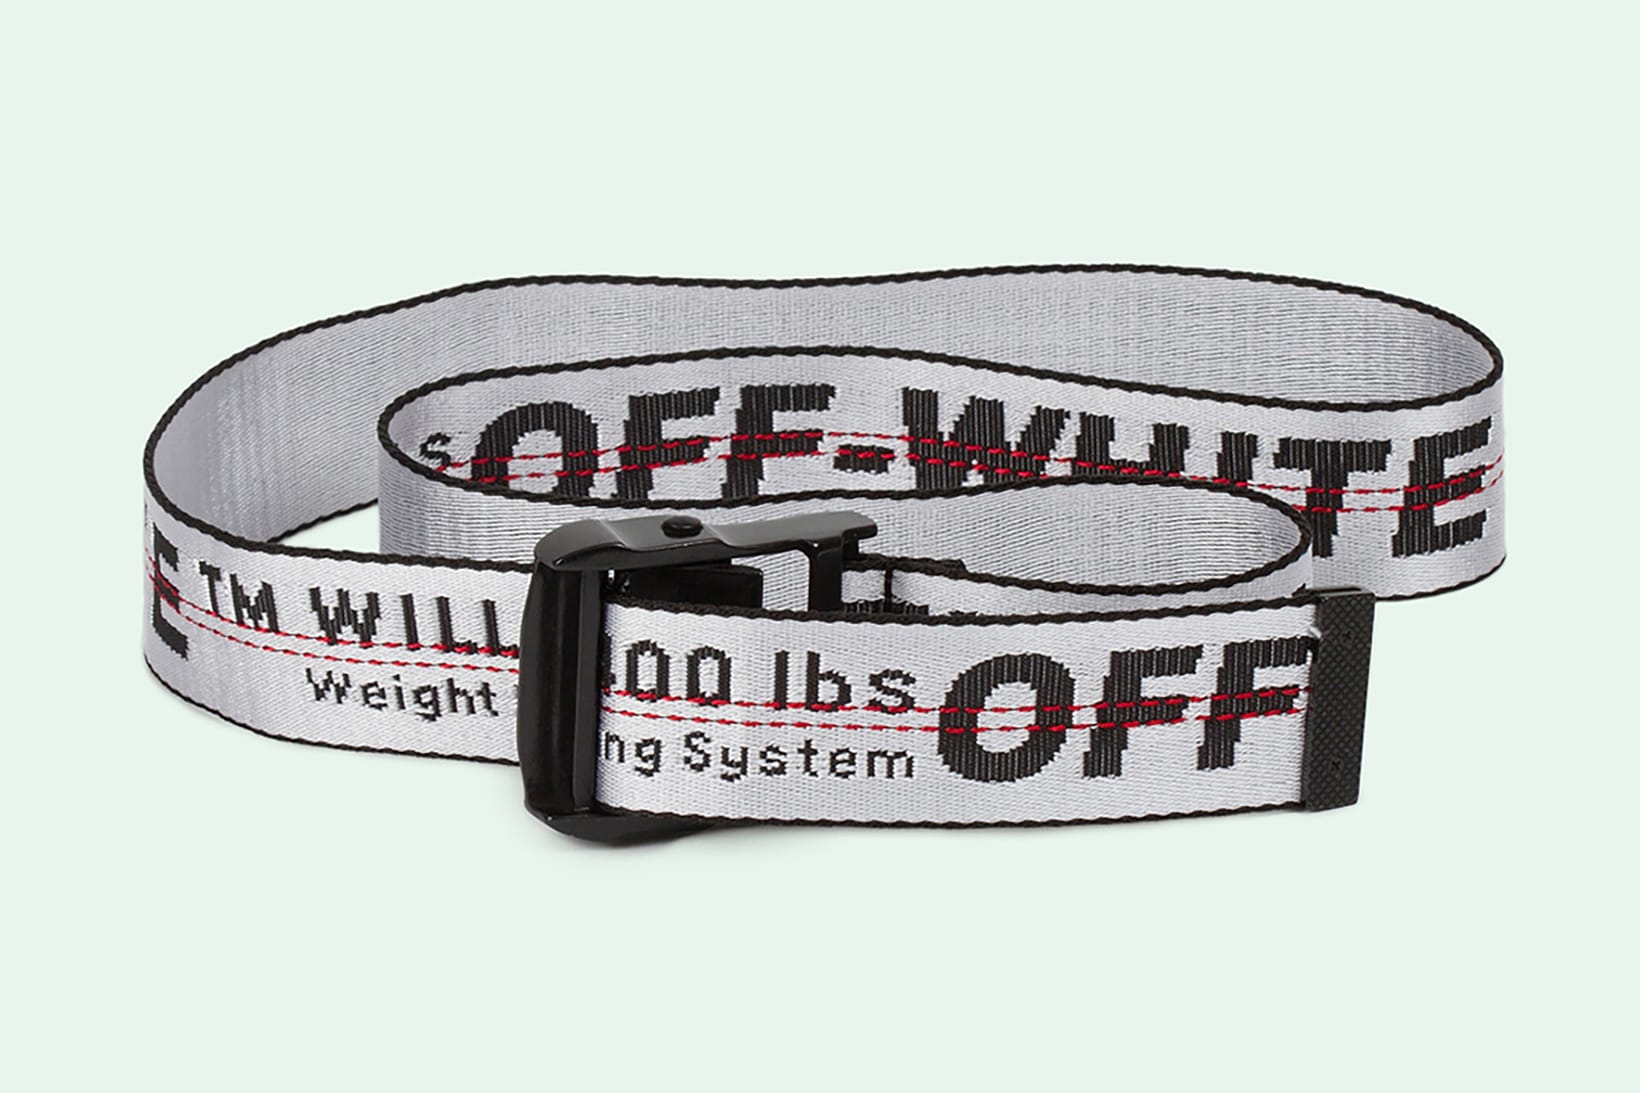 OFF-WHITE Industrial Belt In a White Colorway | Hypebeast